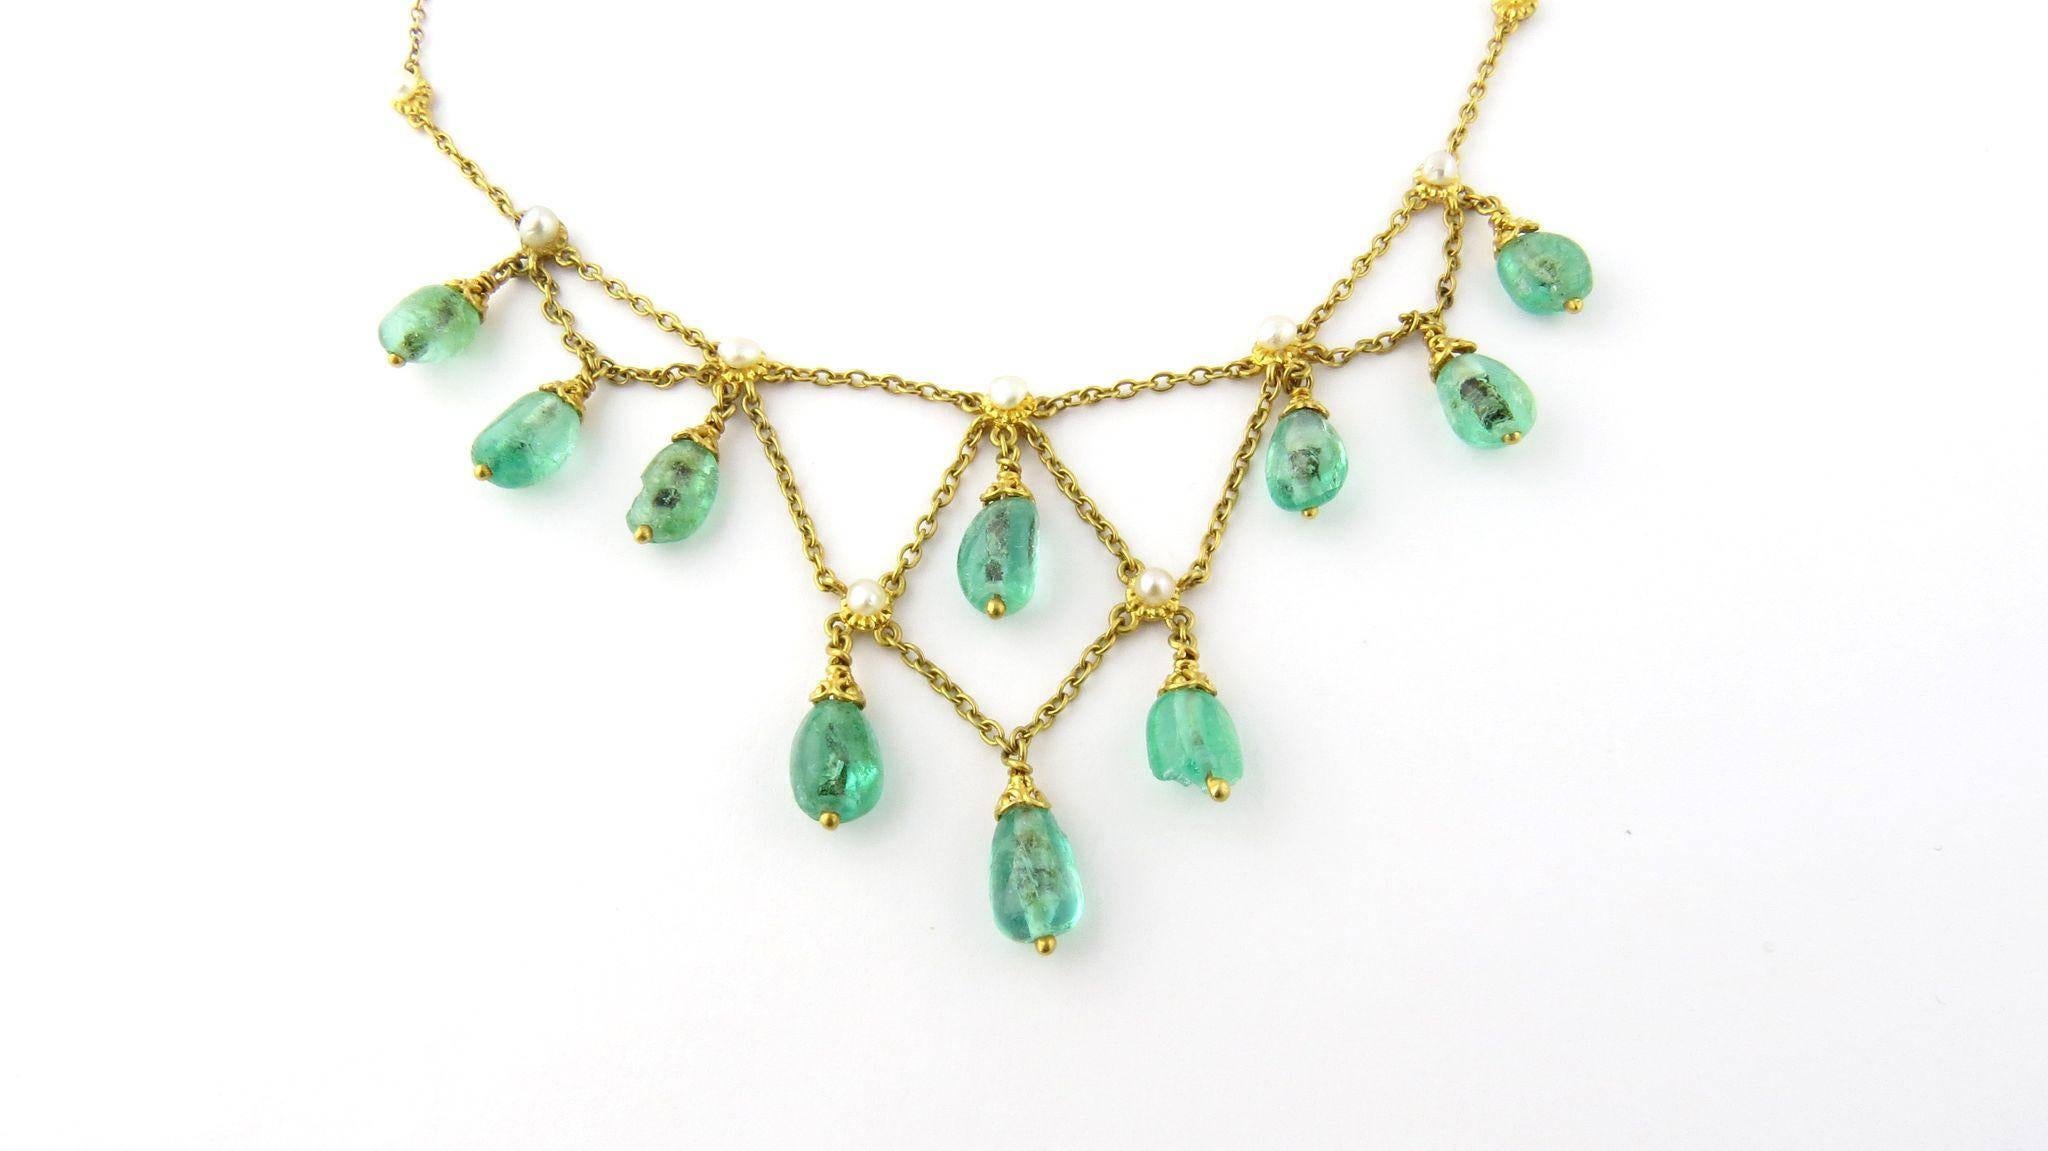 Vintage 14K Yellow Gold and Emerald Drop Bead Seed Pearl Necklace 

This regal necklace is set with 10 genuine emerald beads. 

Each bead is approximately 10 mm x 6 mm 

One of the beads has a large chip on bottom as shown in the pictures. 

9 seed